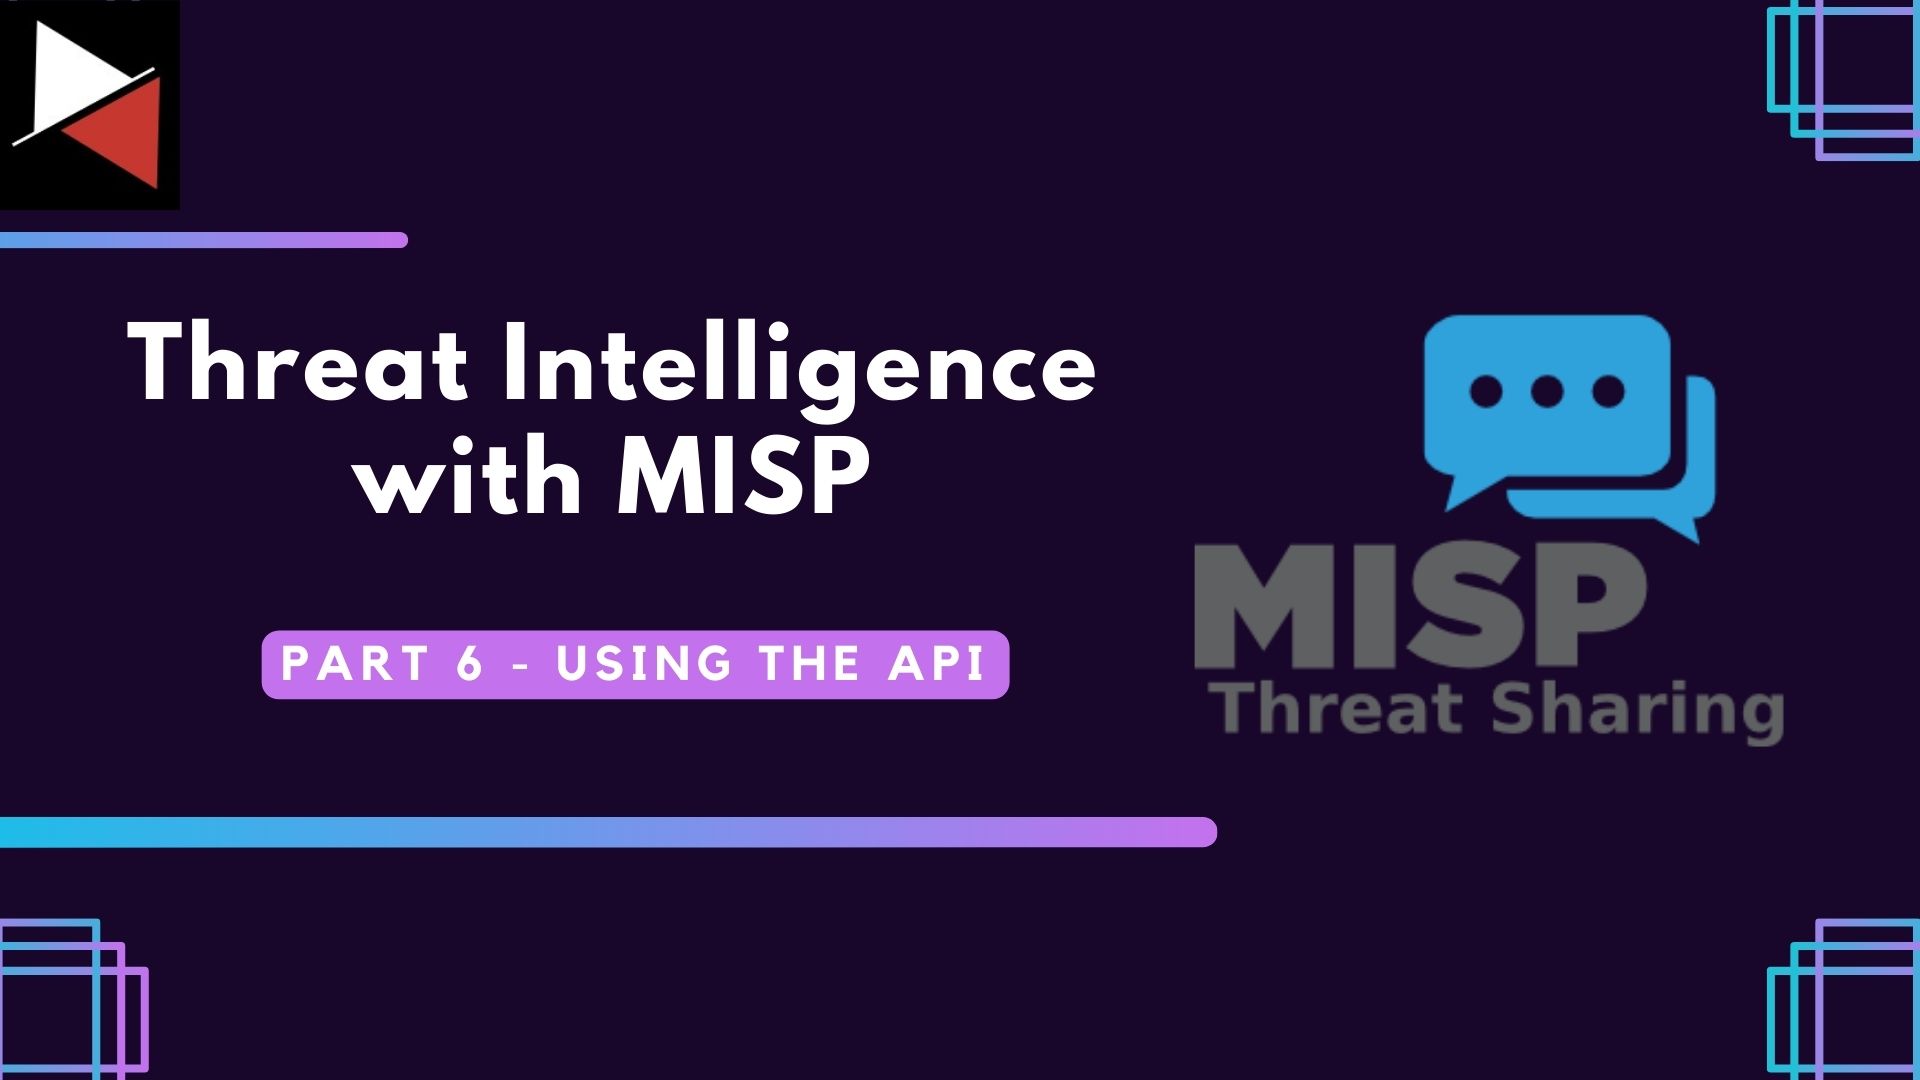 Threat Intelligence with MISP Part 6 - Using the API